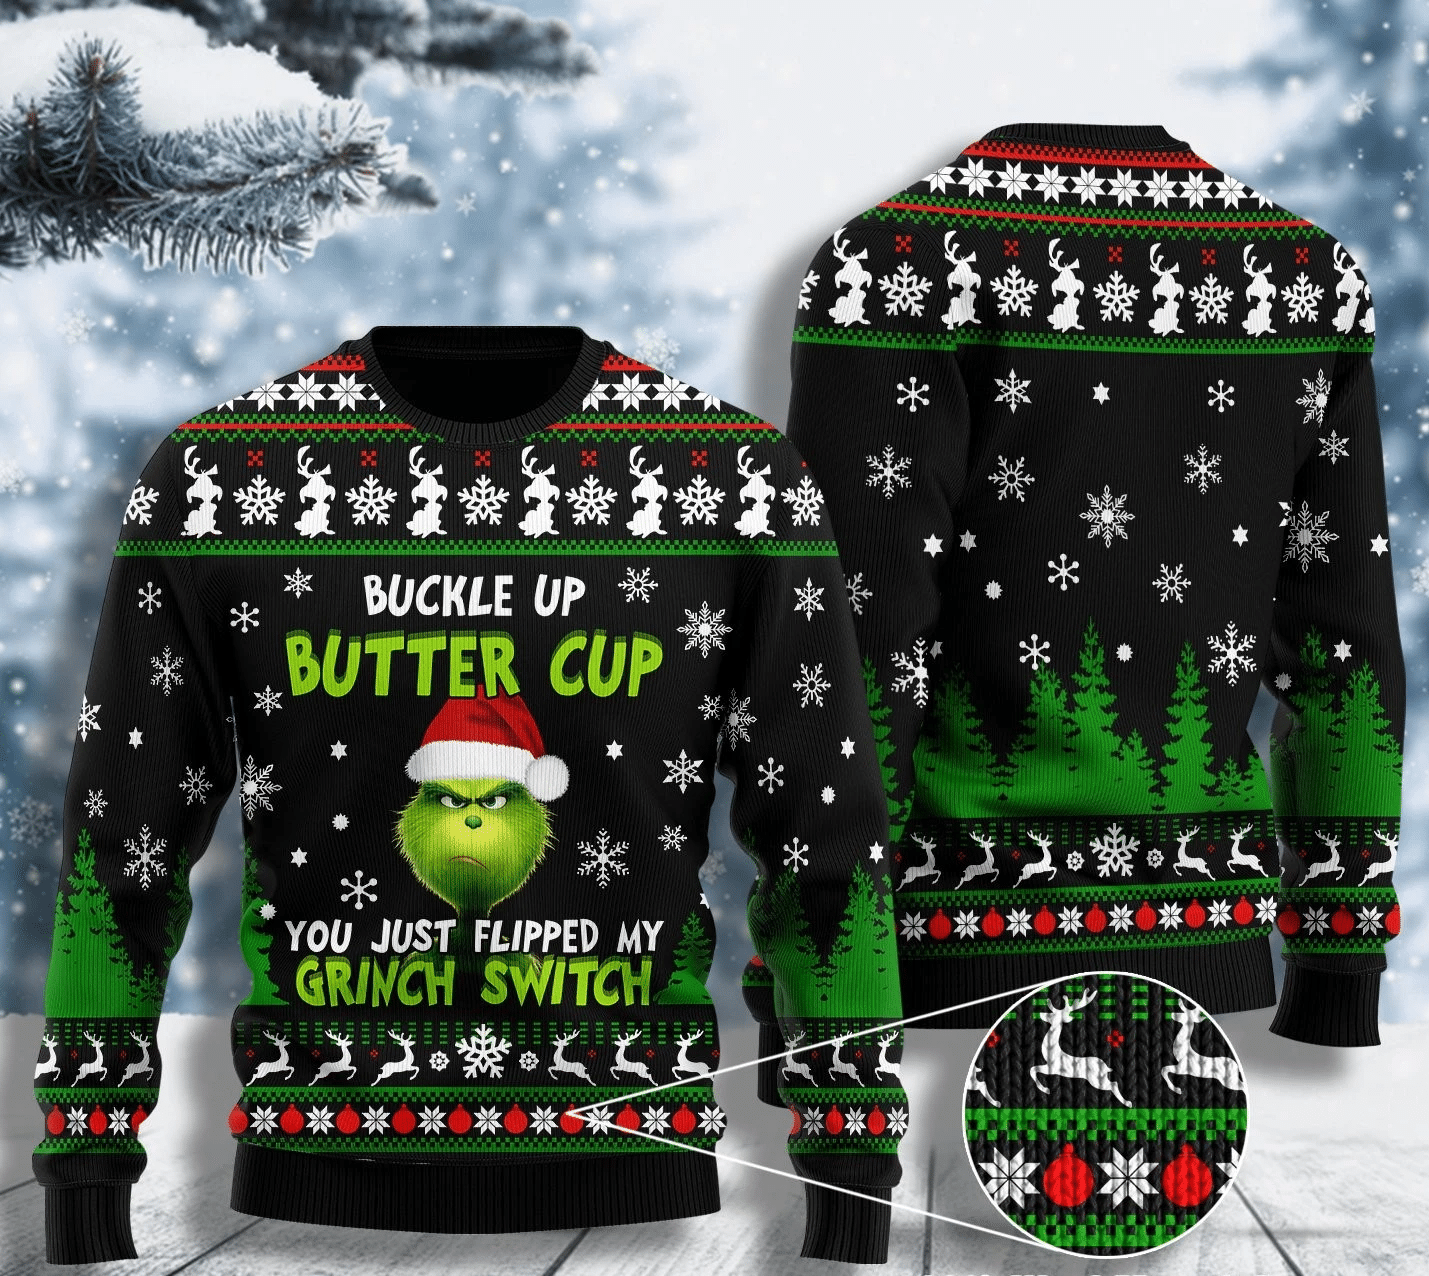 https://image.whatamazingthings.com/2022/11/buckle-up-buttercup-grinch-ugly-christmas-sweater.png